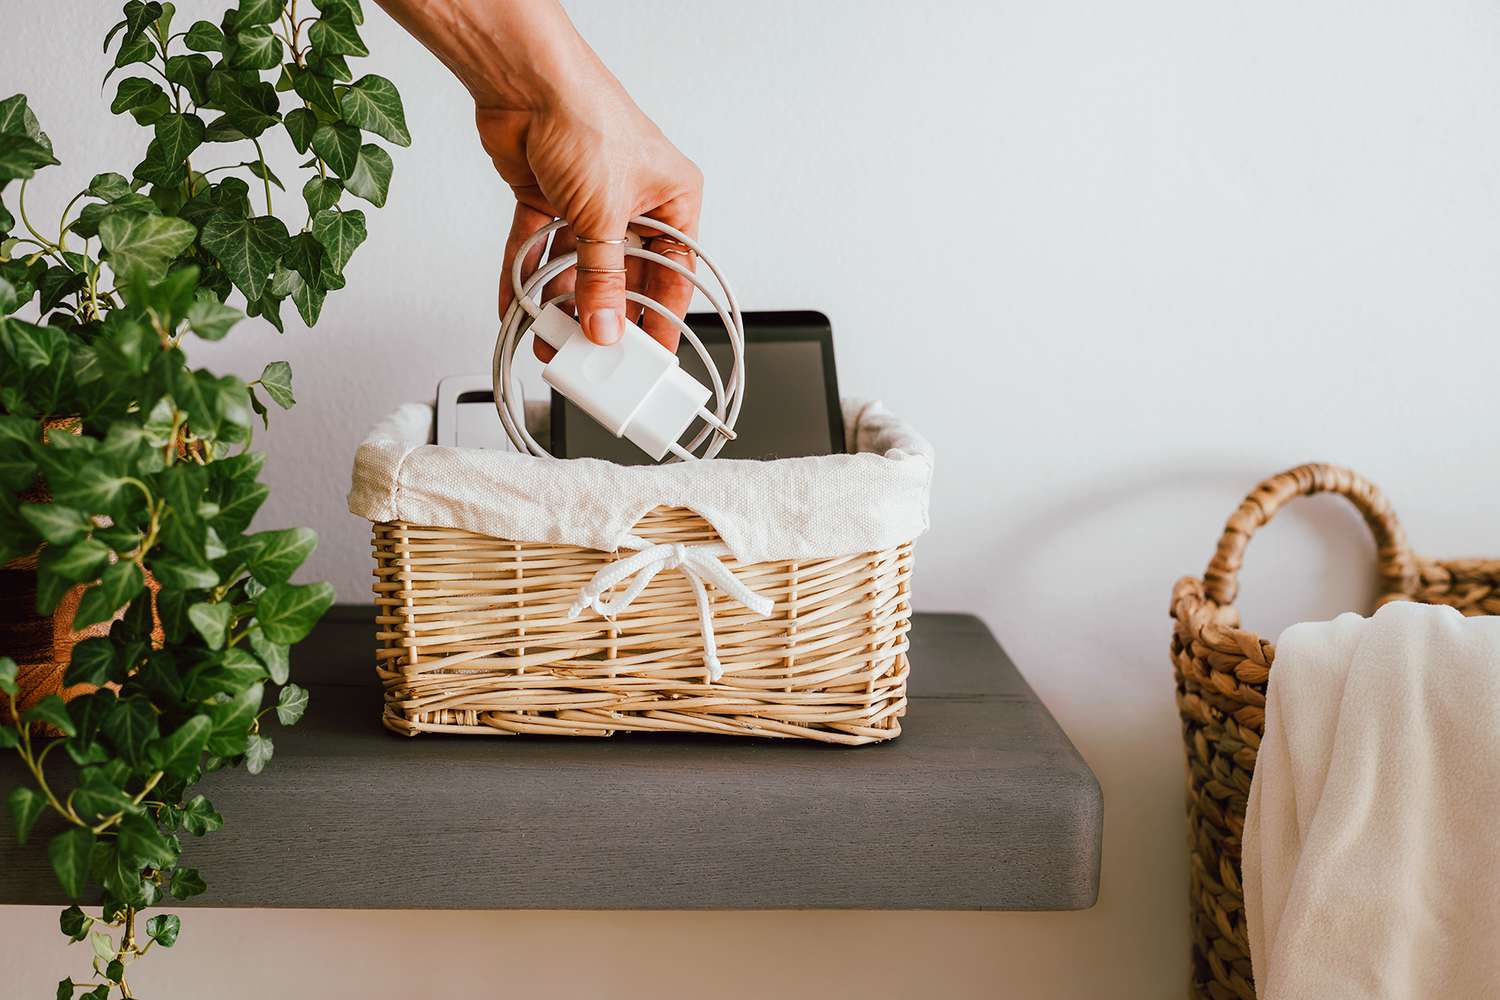 Wrapped charging cord placed in small basket with smart devices next to plant